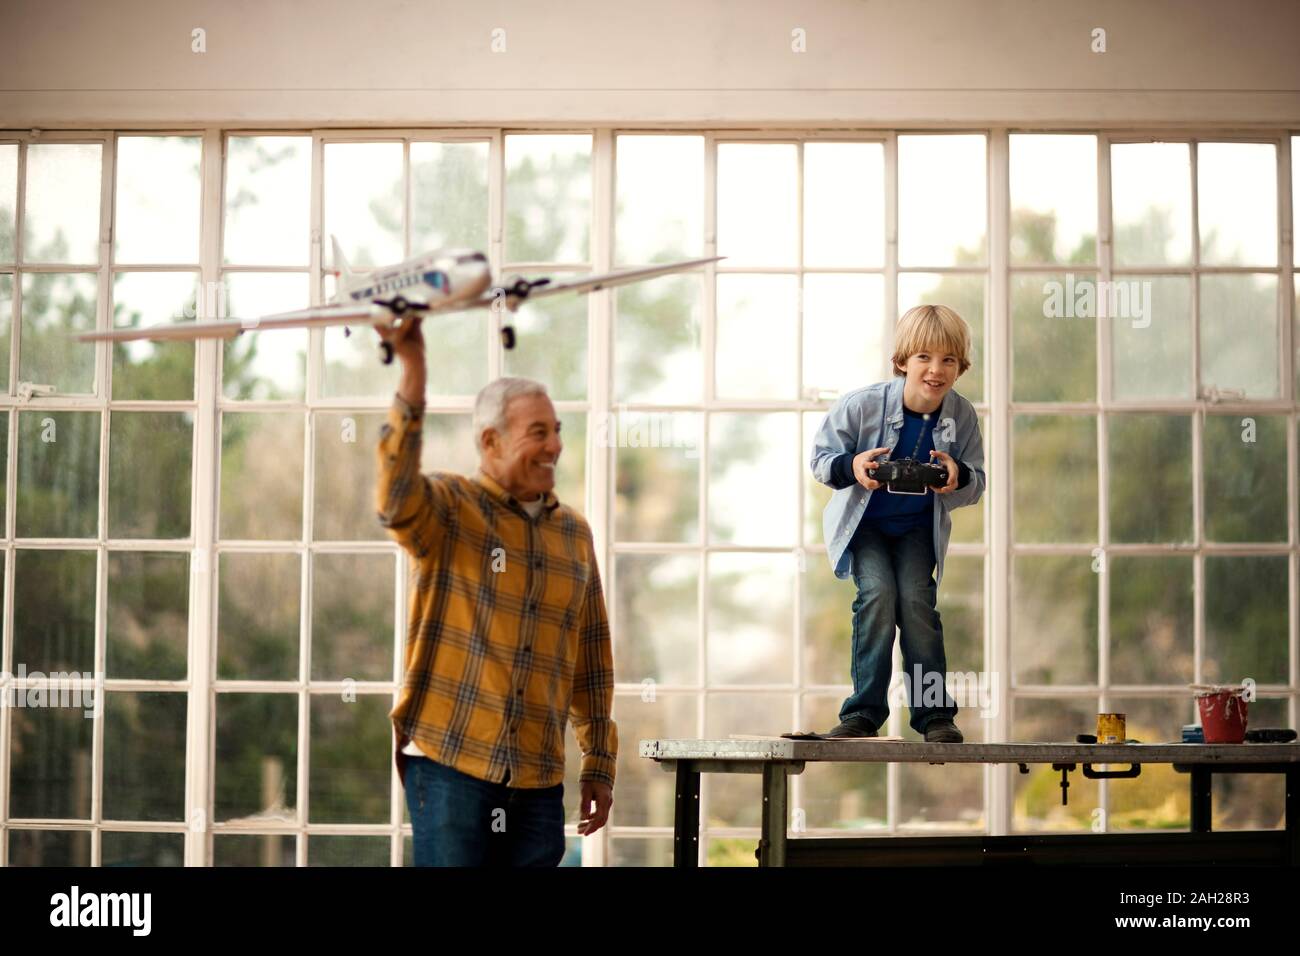 Smiling senior man and his grandson playing with a toy airplane together inside a garage. Stock Photo